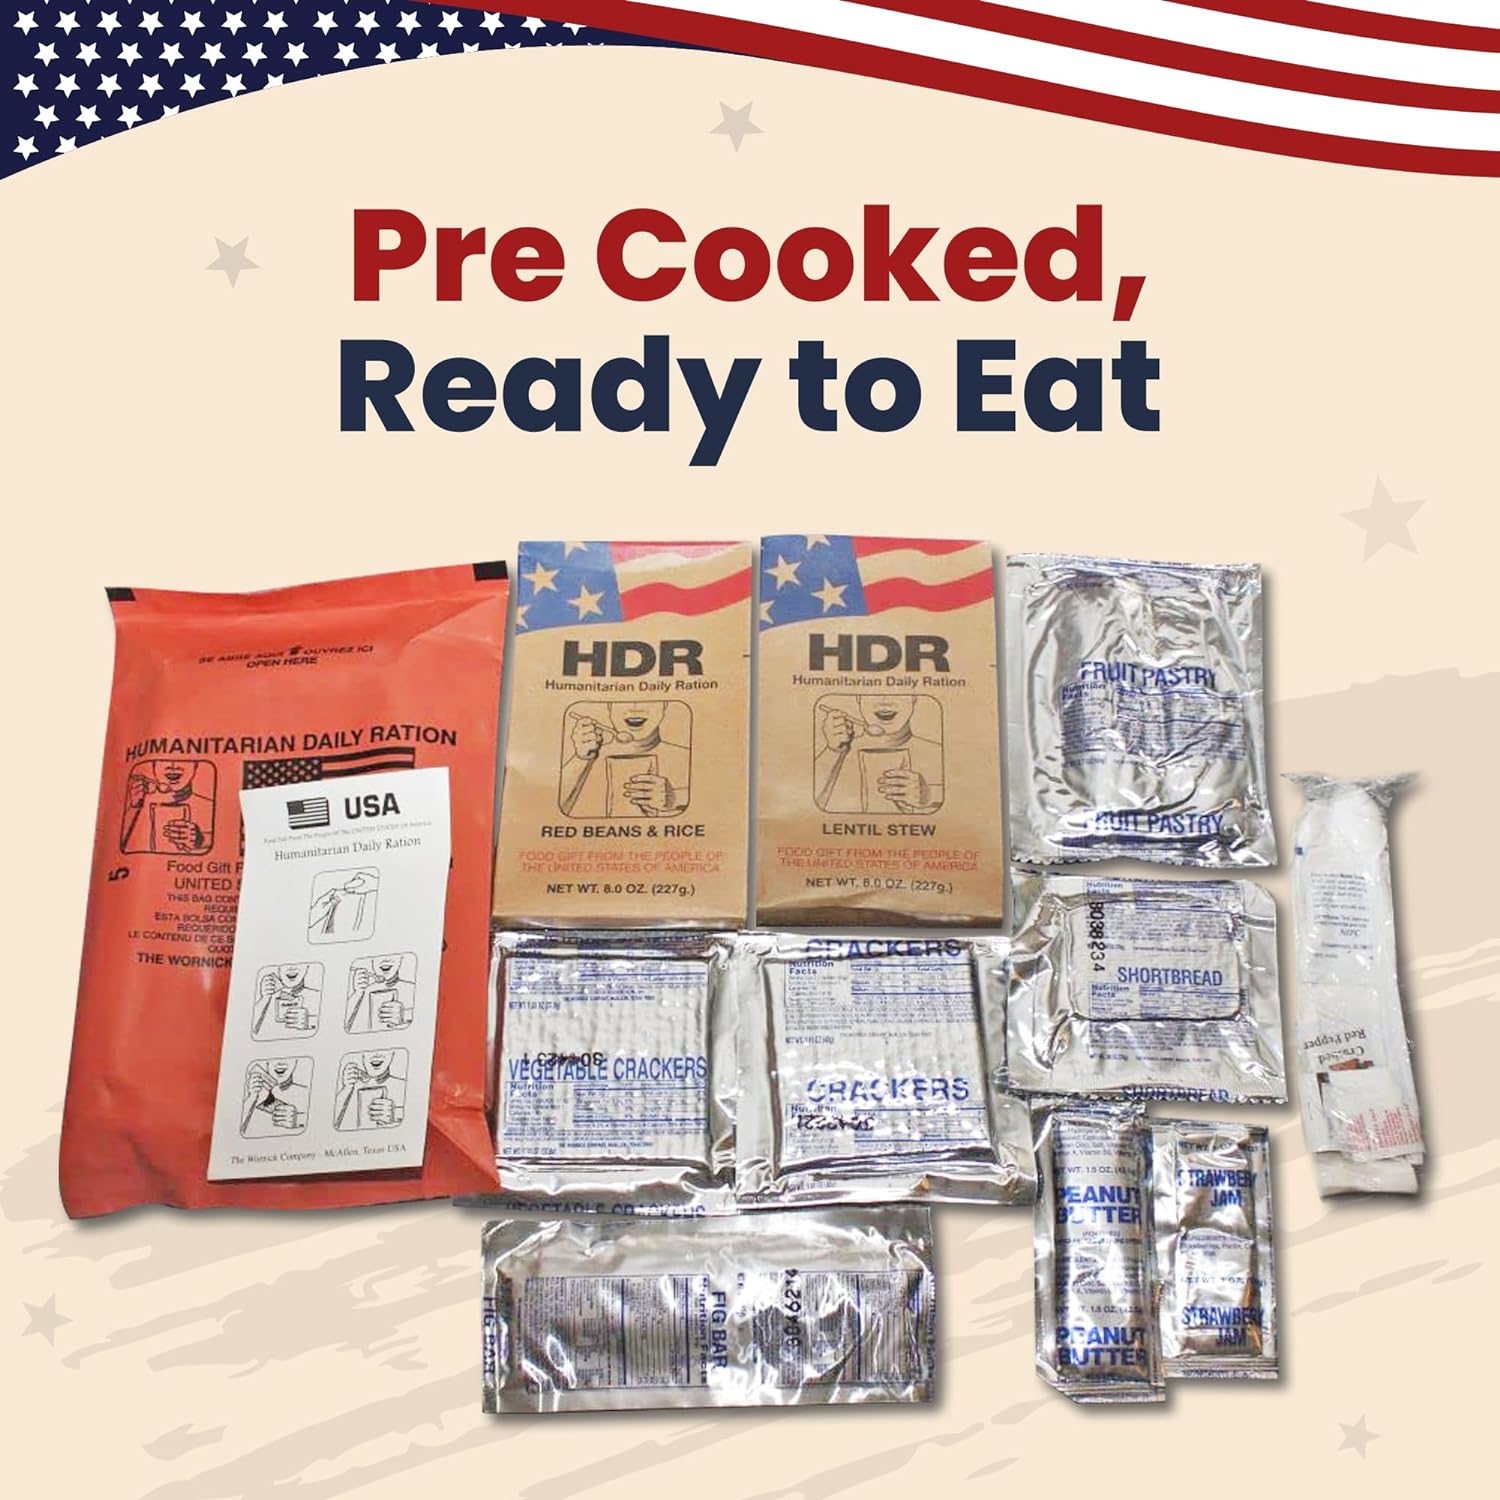 Humanitarian Daily Ration MRE Case Review